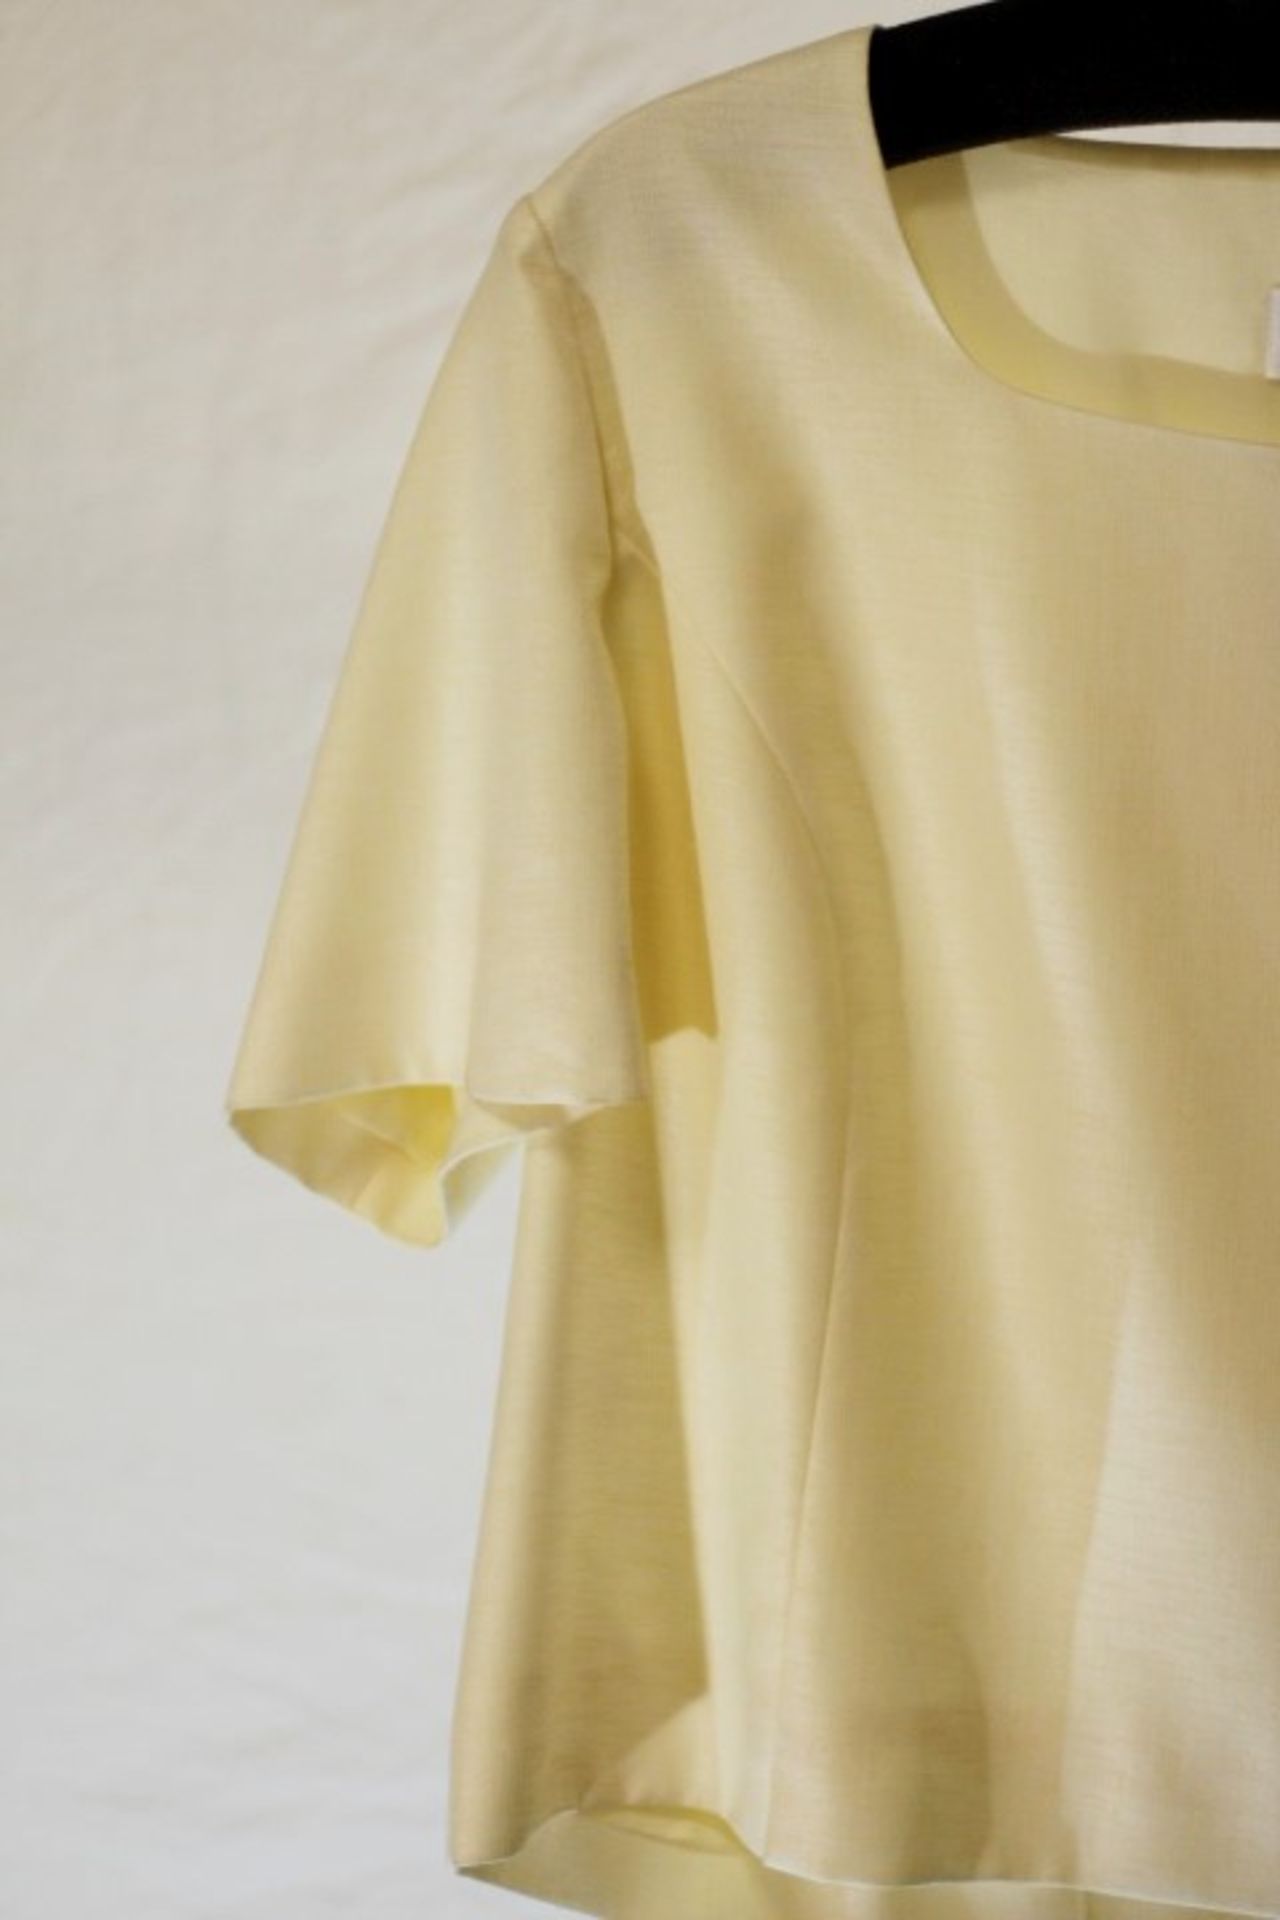 1 x Constantin Paris Cream Top - Size: 22 - Material: 100% Polyester - From a High End Clothing - Image 5 of 8